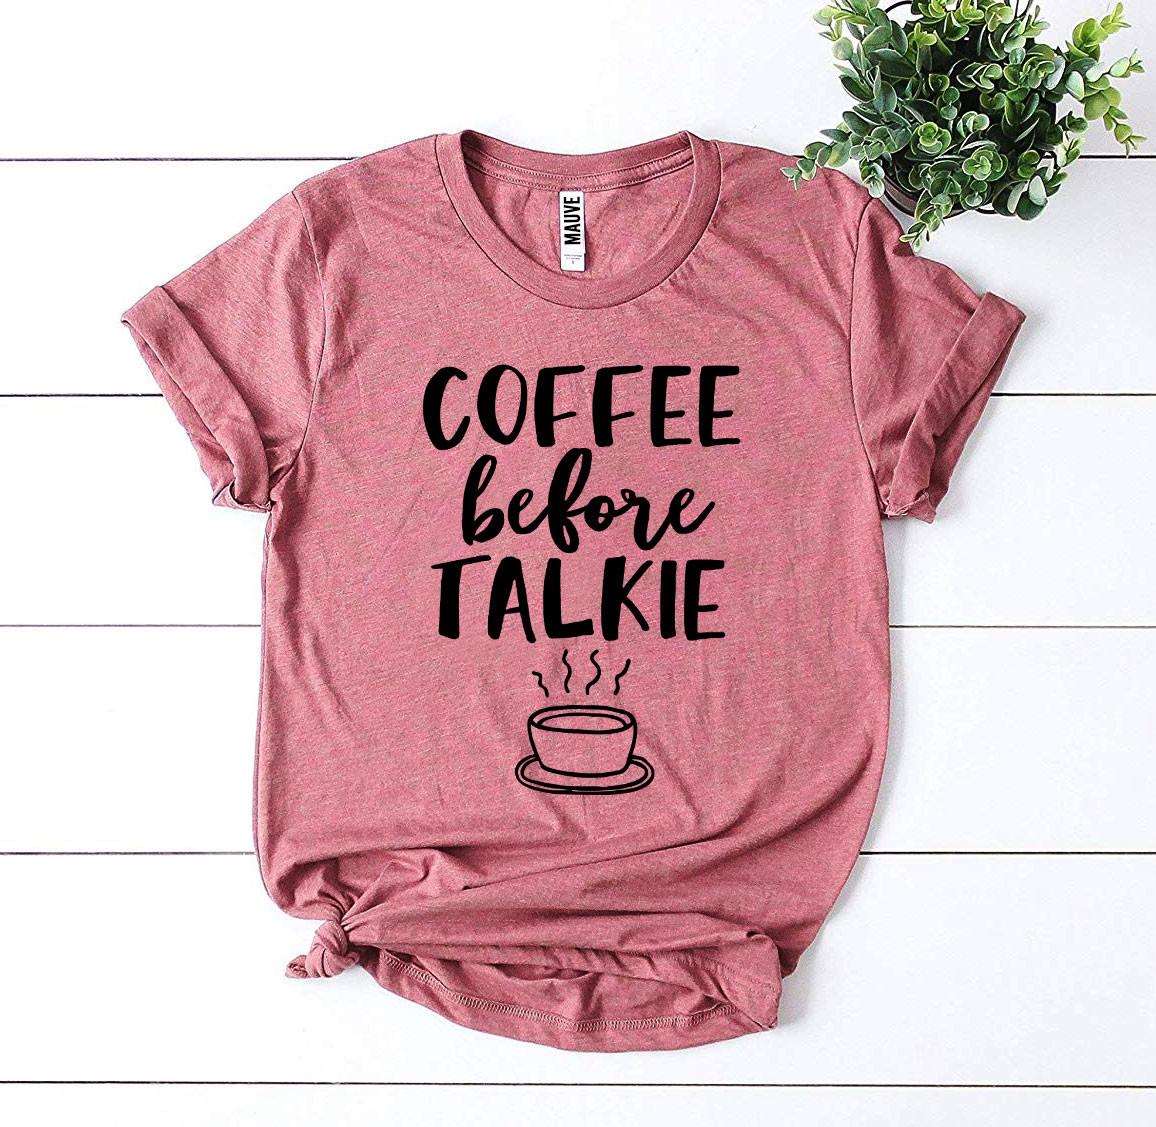 Nfin8 Morning Mantra - 'Coffee Before Talkie' Premium Soft T-Shirt